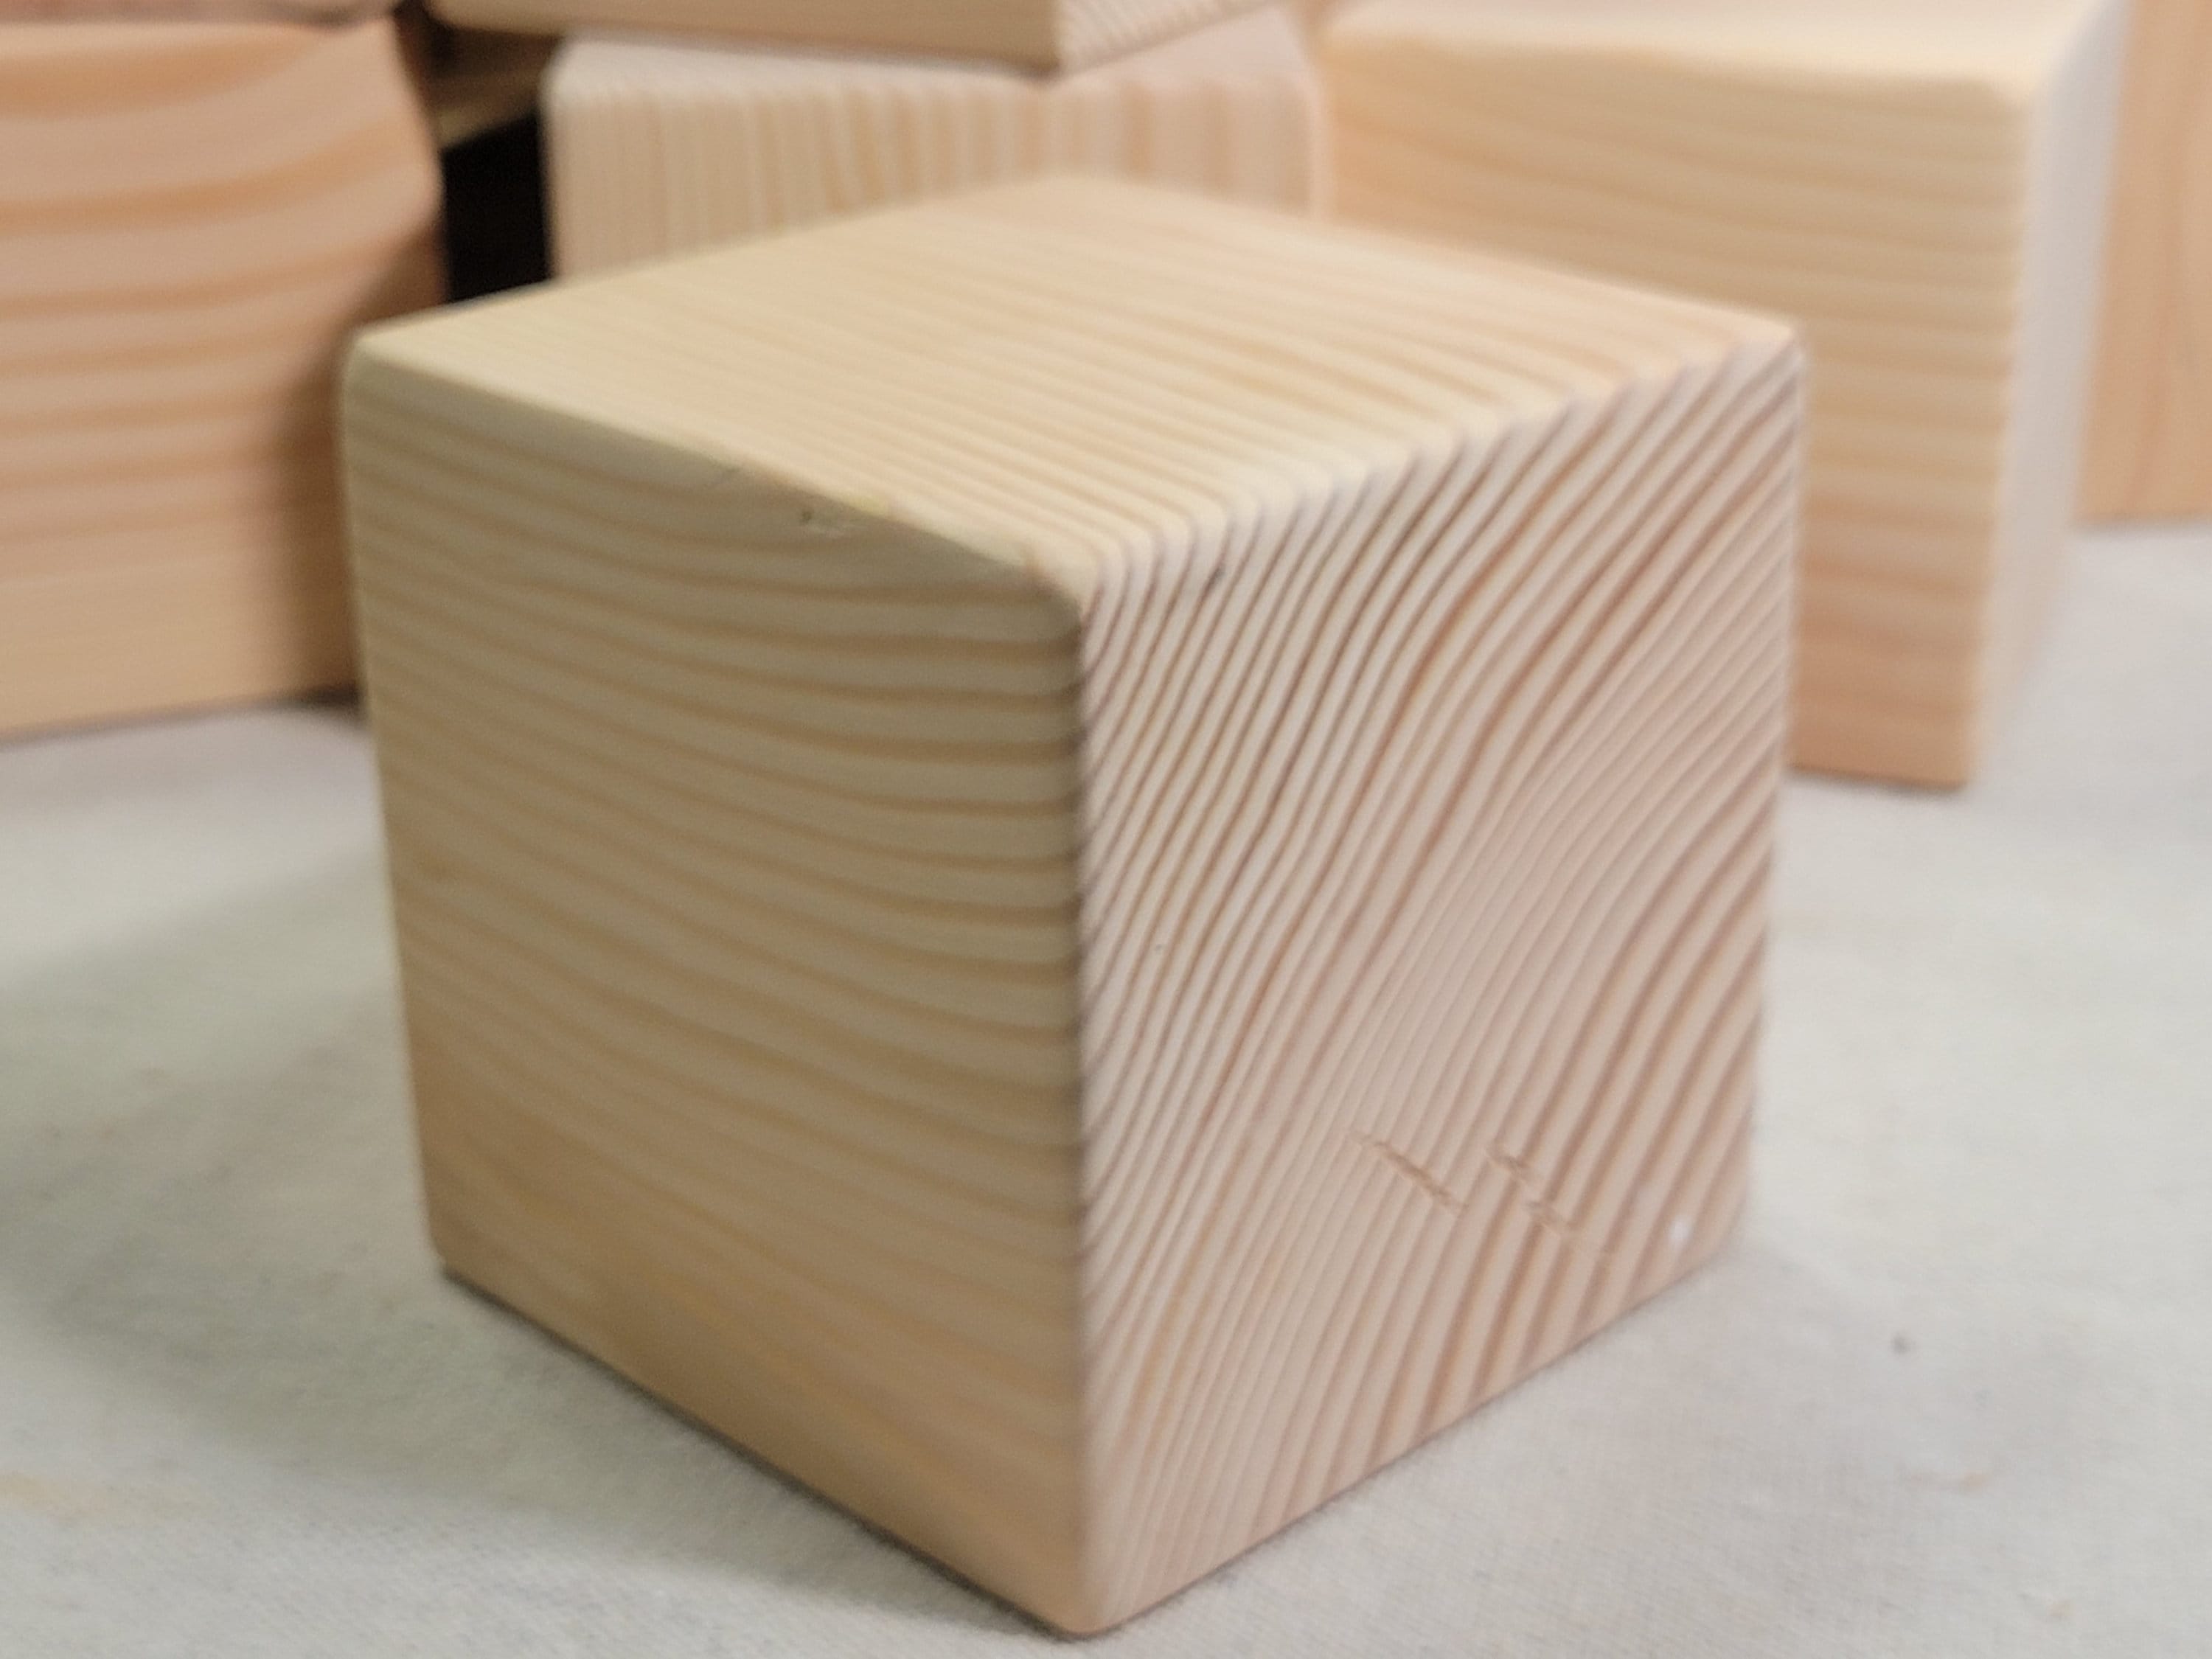 Small Wooden Cube, One Inch Unfinished Wooden Cube, 1 Unfinished